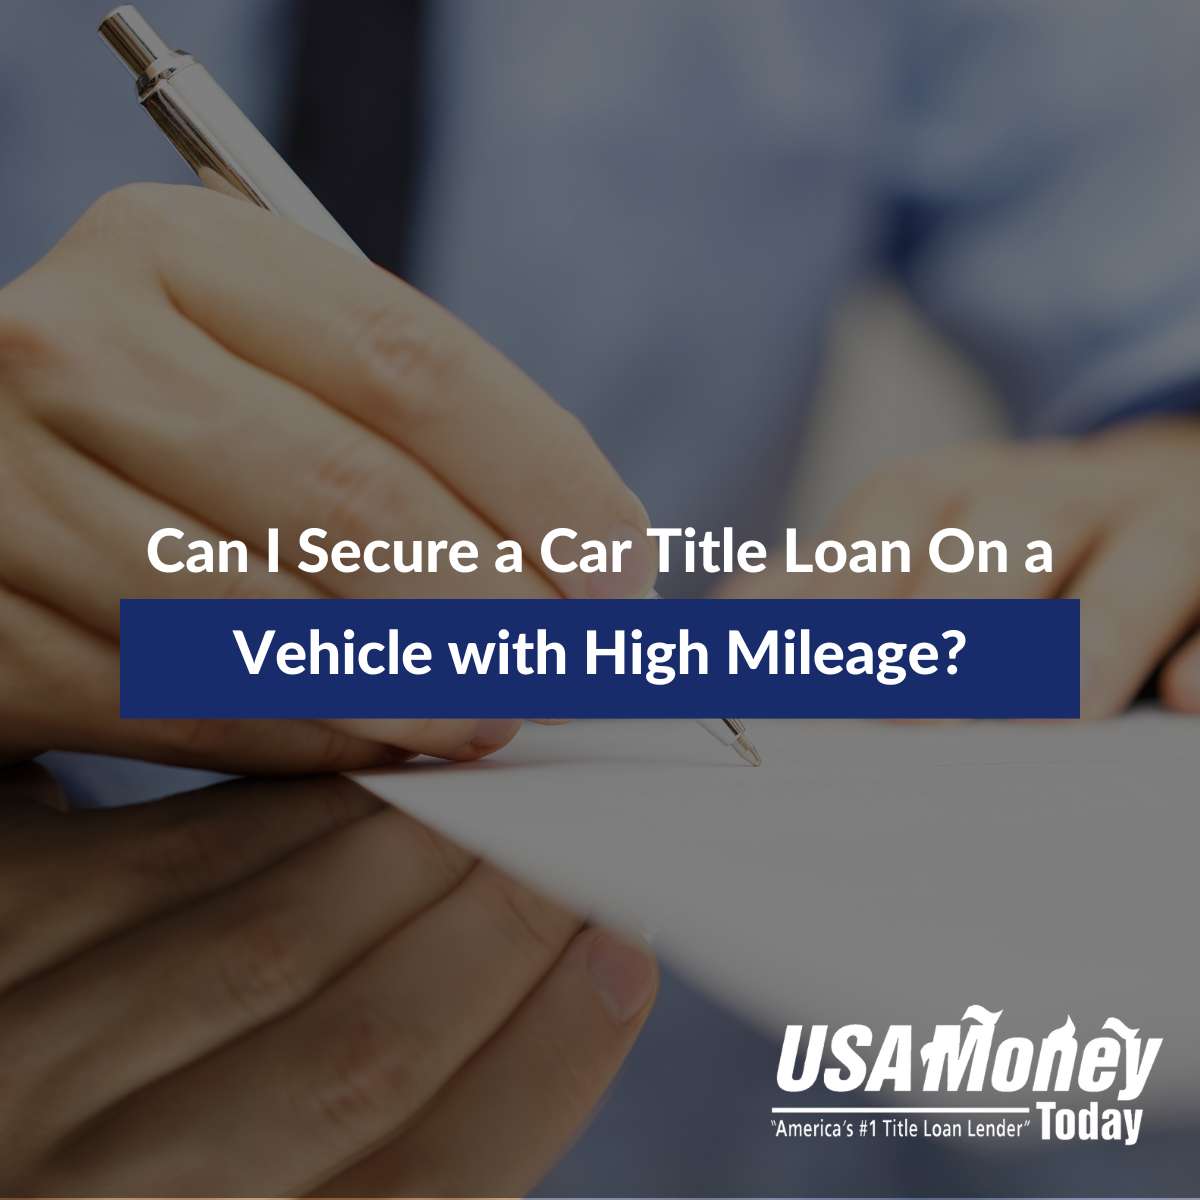 Can I Secure a Car Title Loan On a Vehicle with High Mileage?